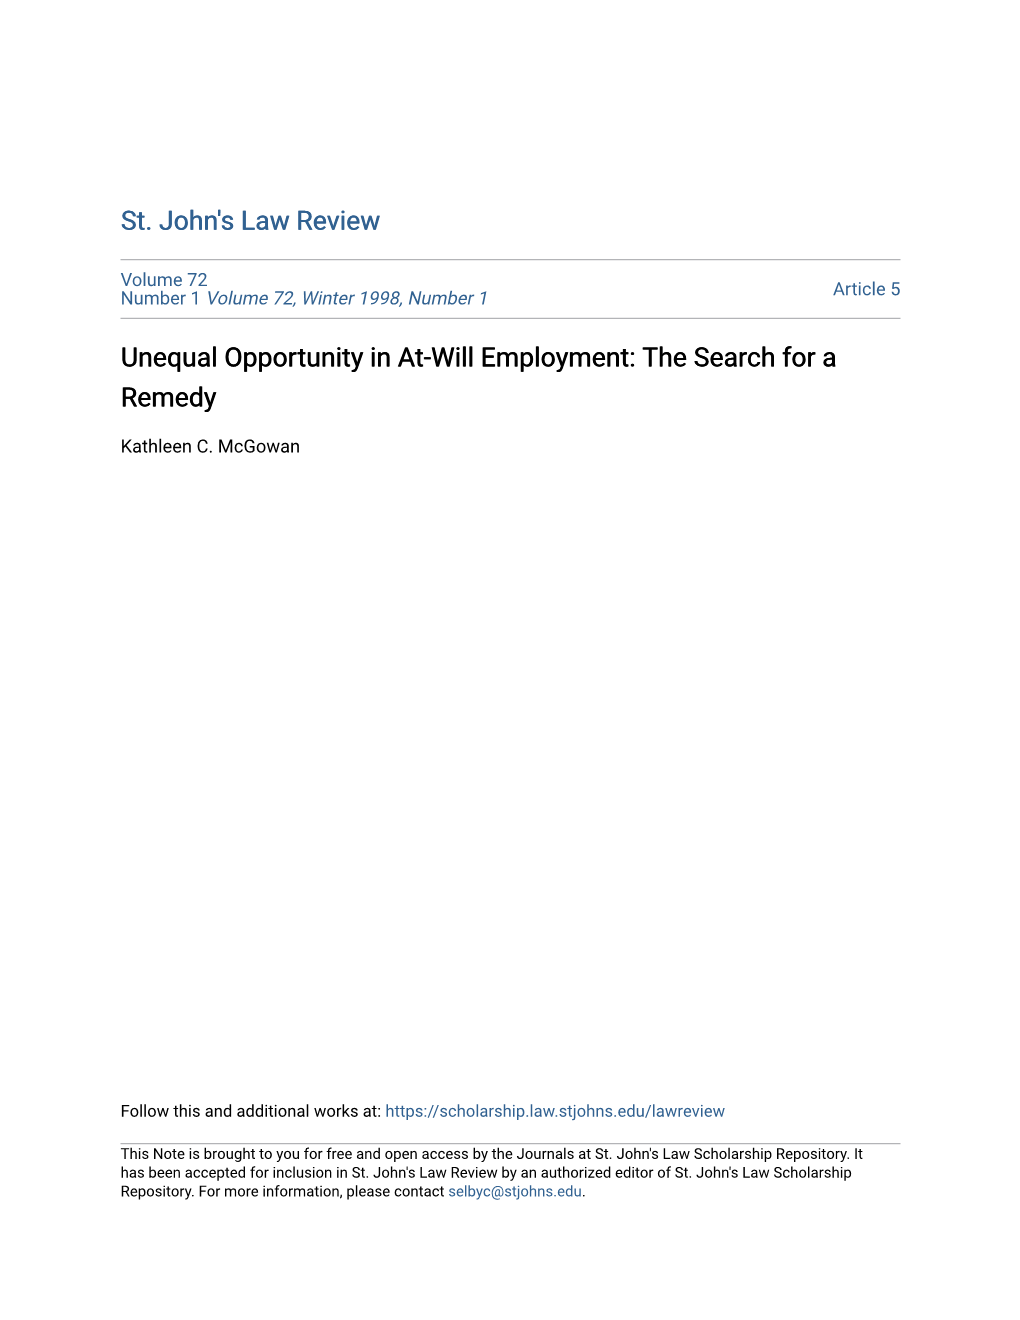 Unequal Opportunity in At-Will Employment: the Search for a Remedy